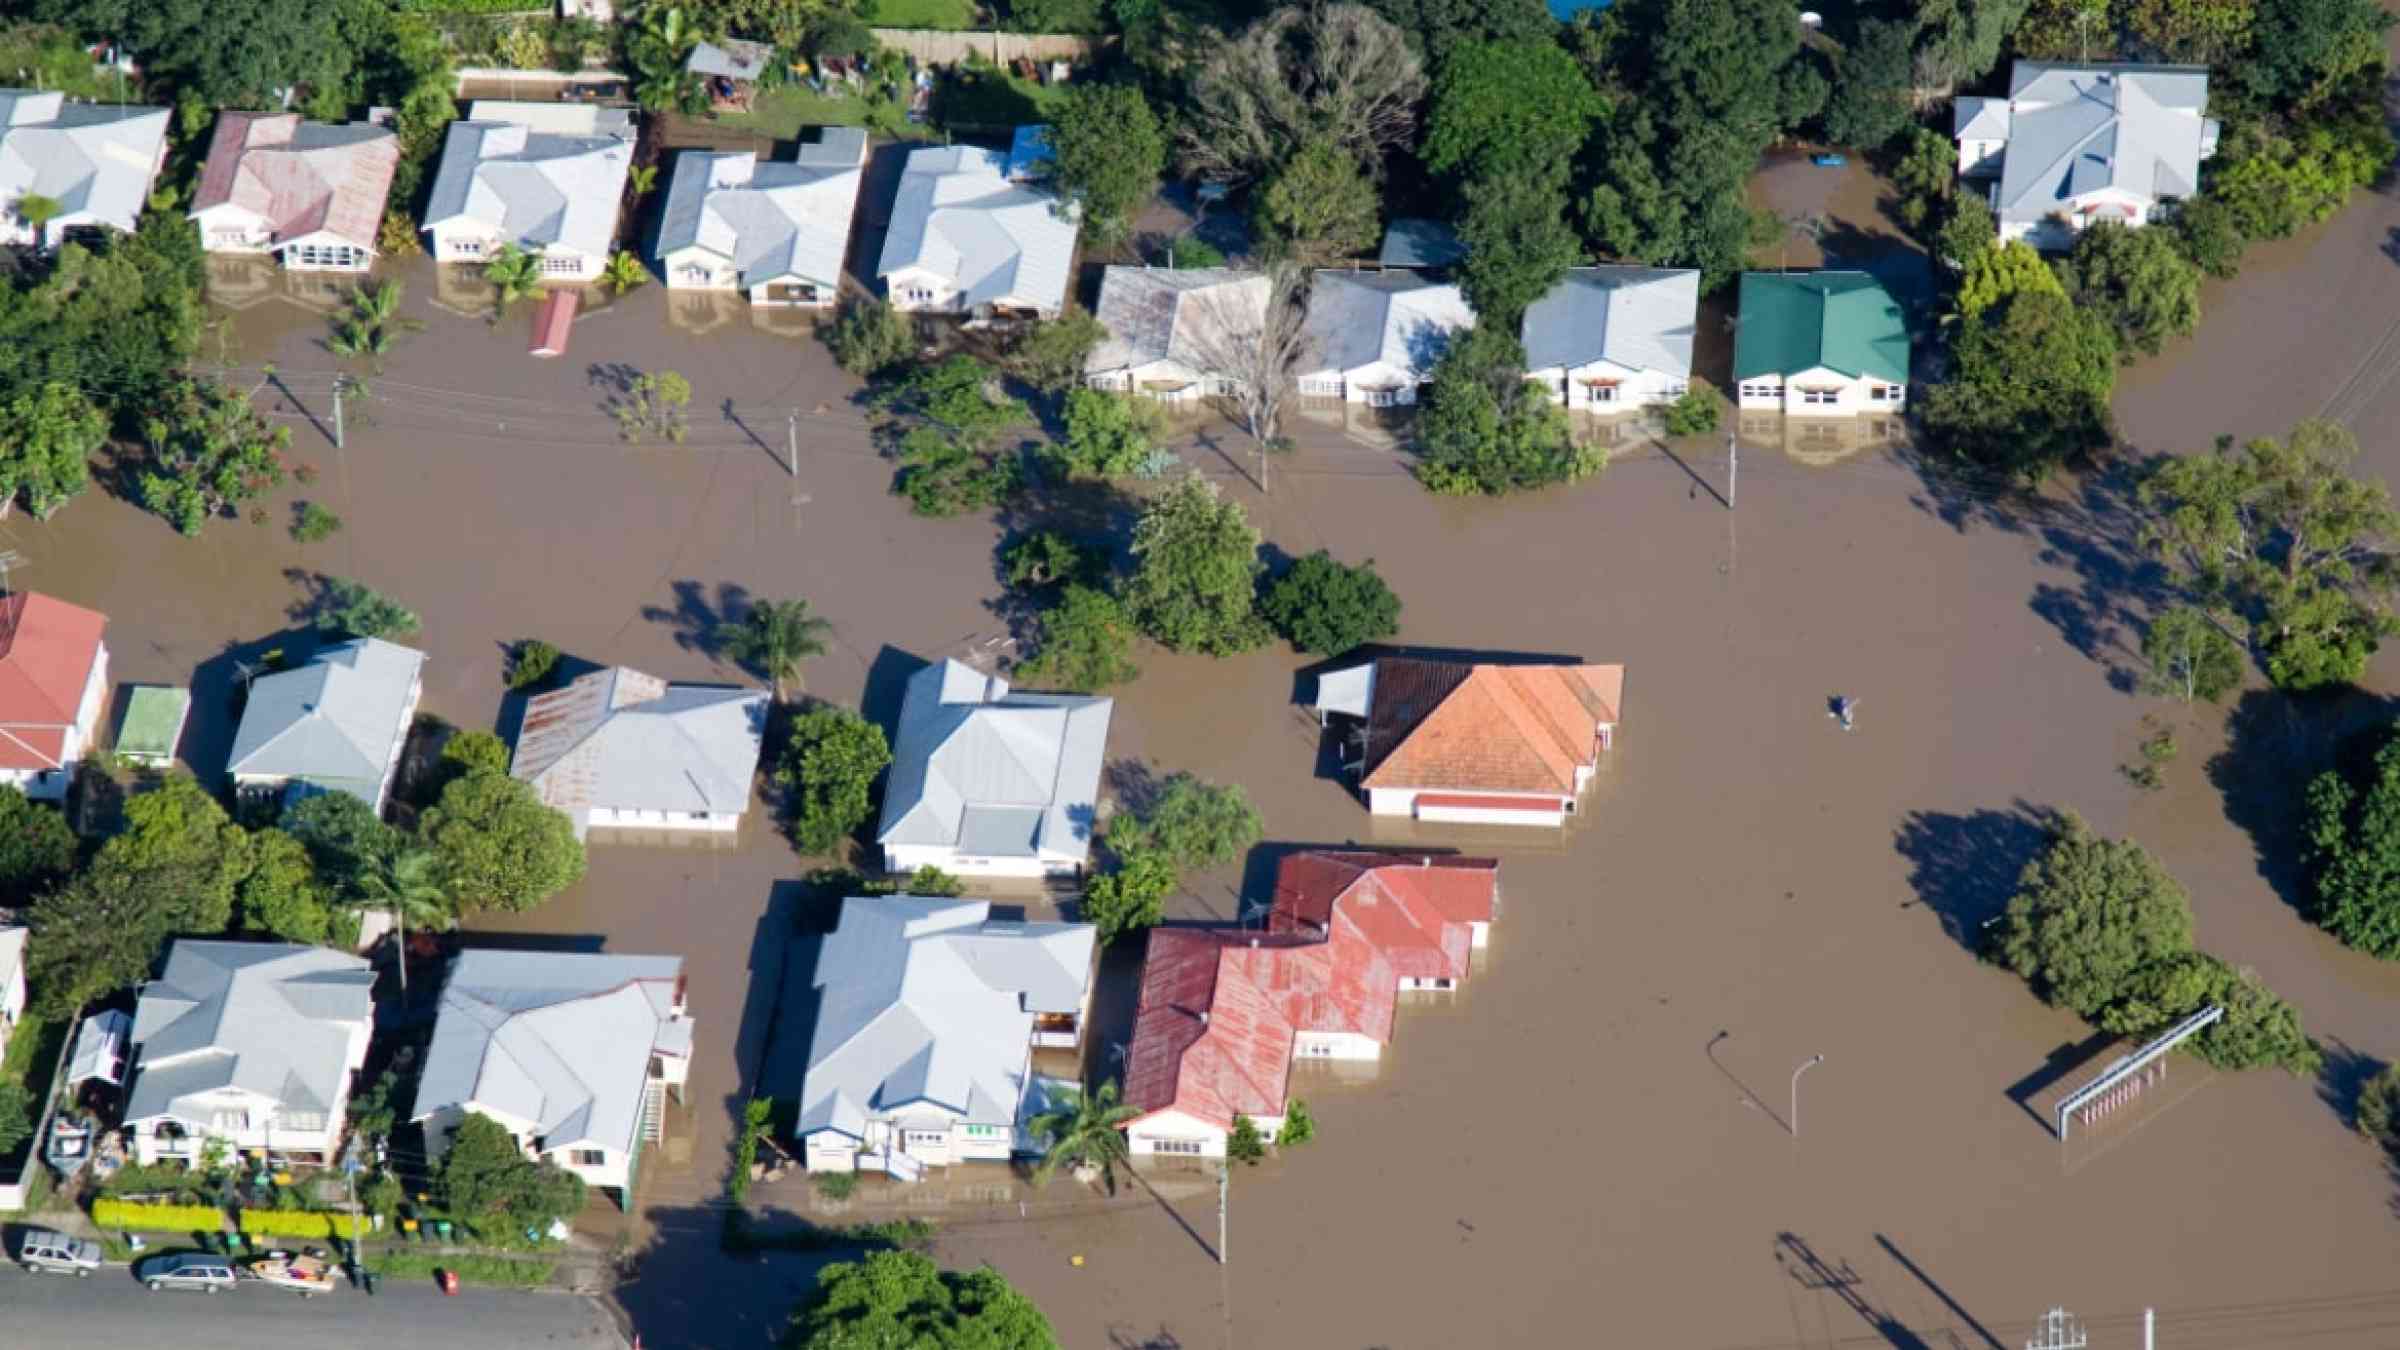 Aerial View of homes under water in Australia's flooding disaster. Also features paddlers surveying damage.